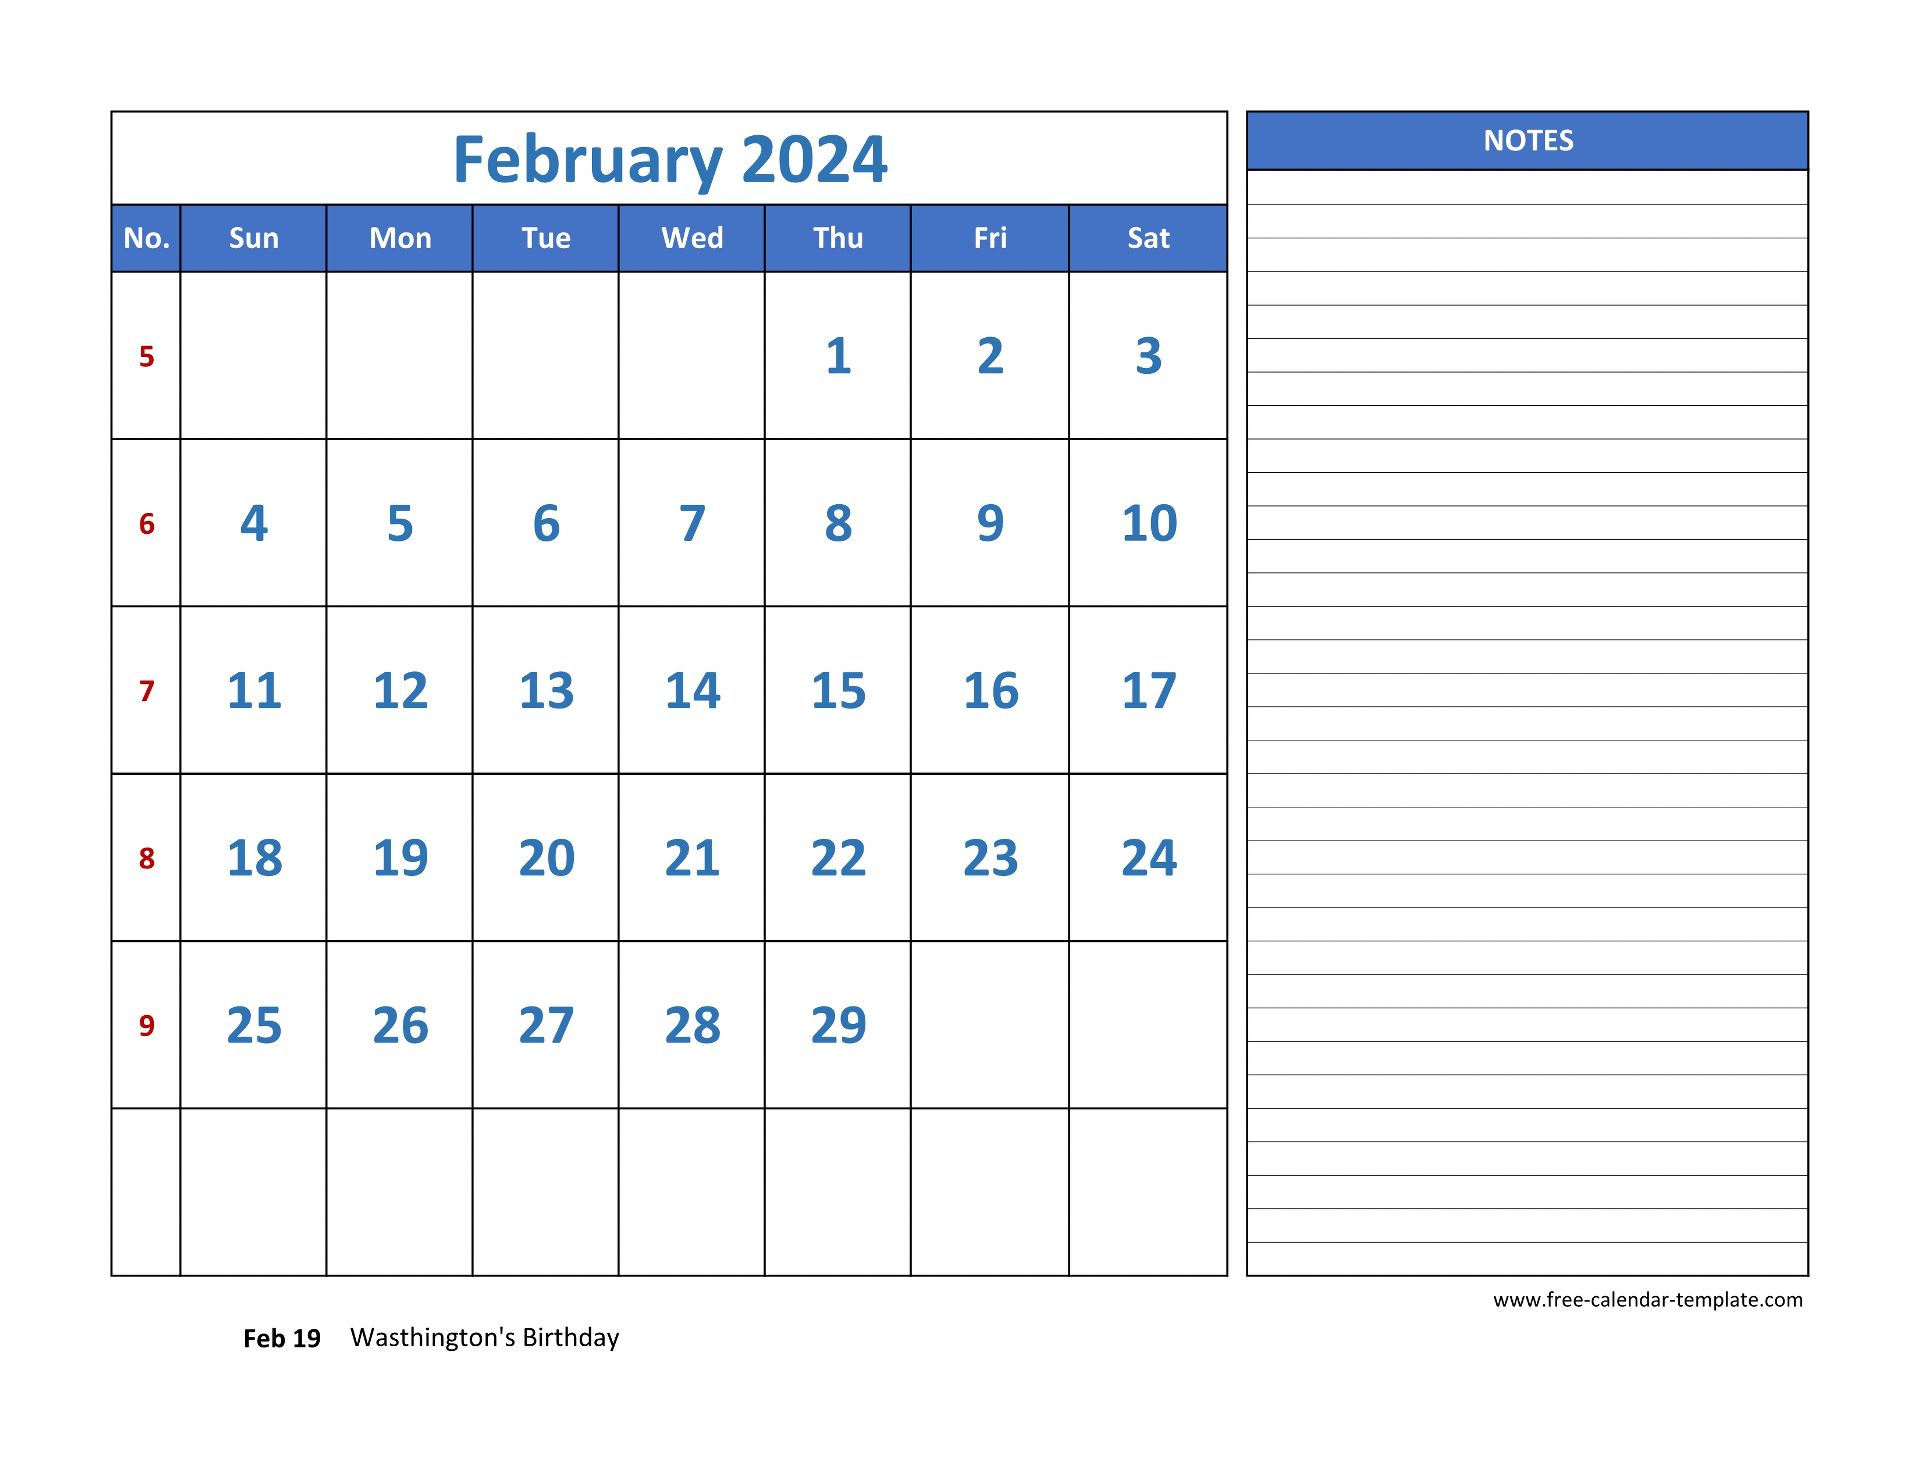 February Calendar 2024 grid lines for holidays and notes (horizontal